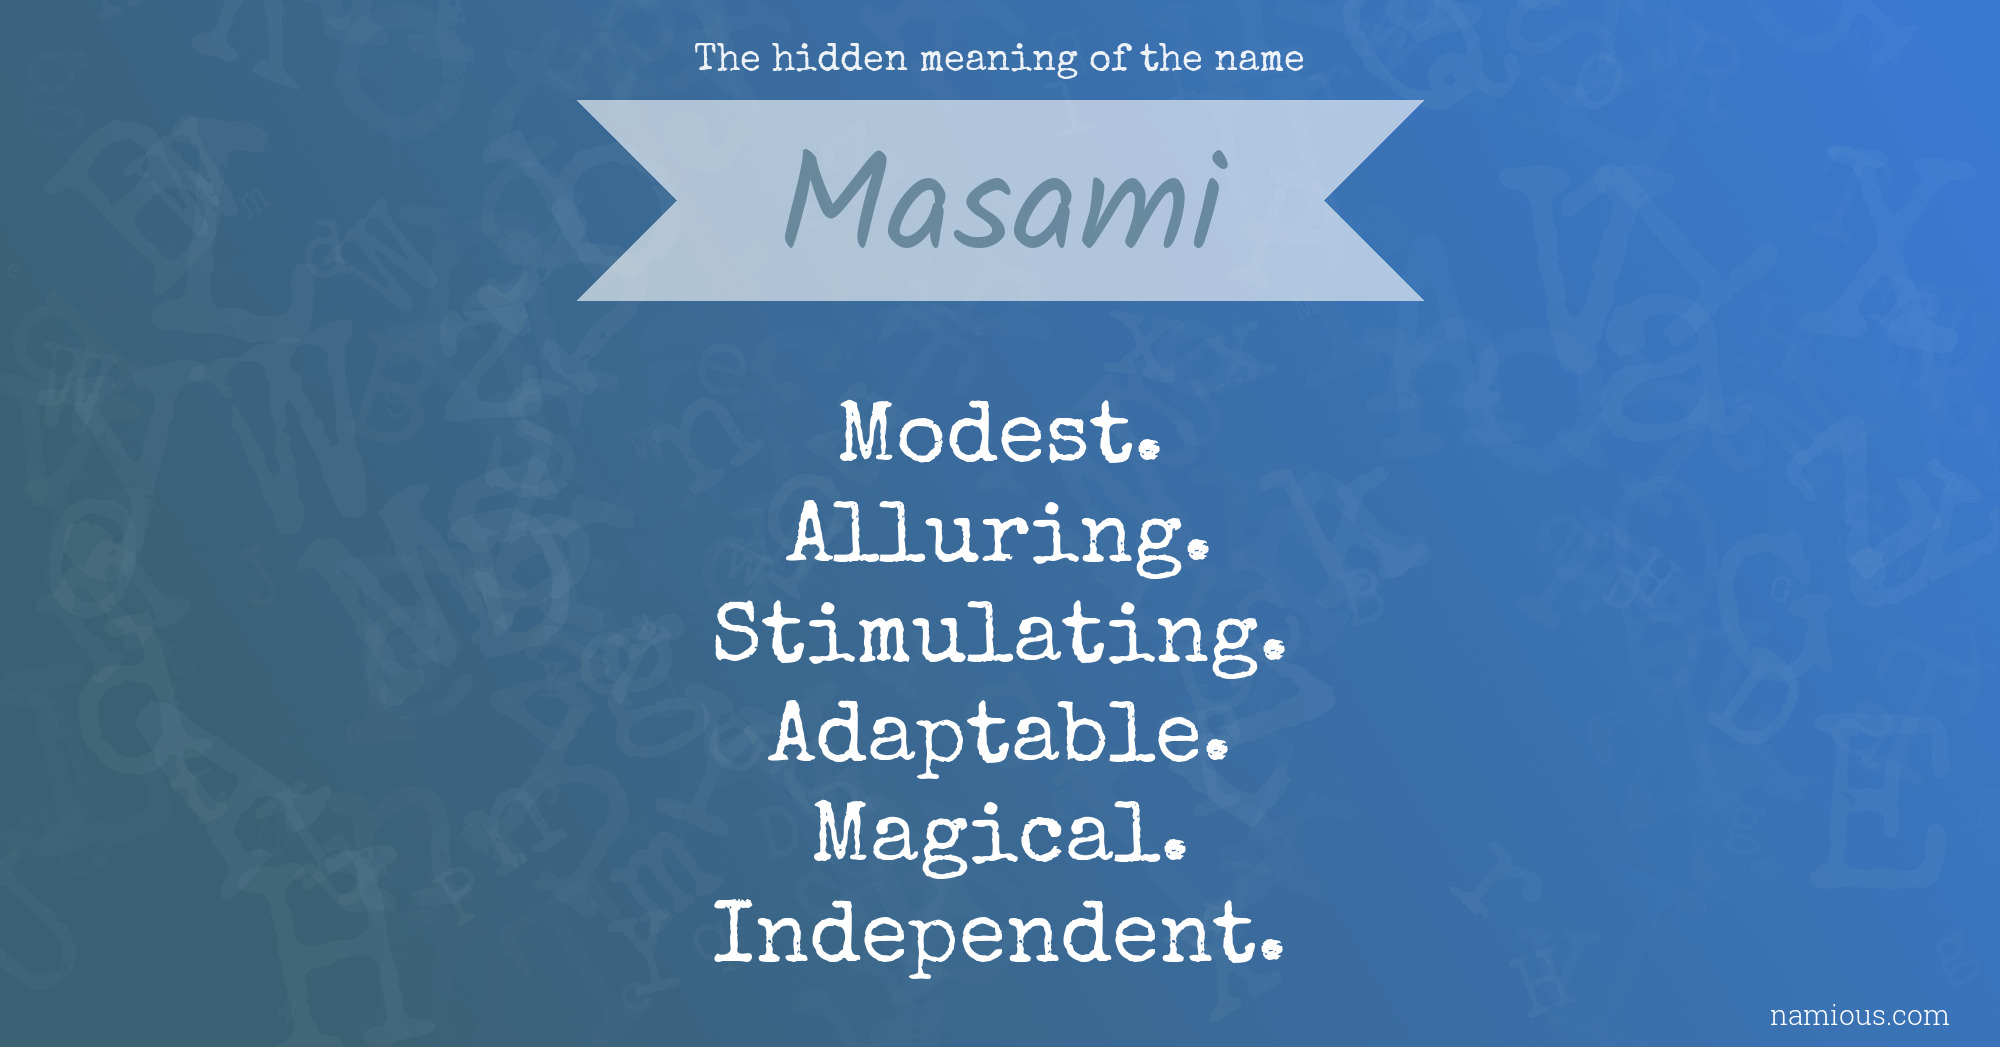 The hidden meaning of the name Masami